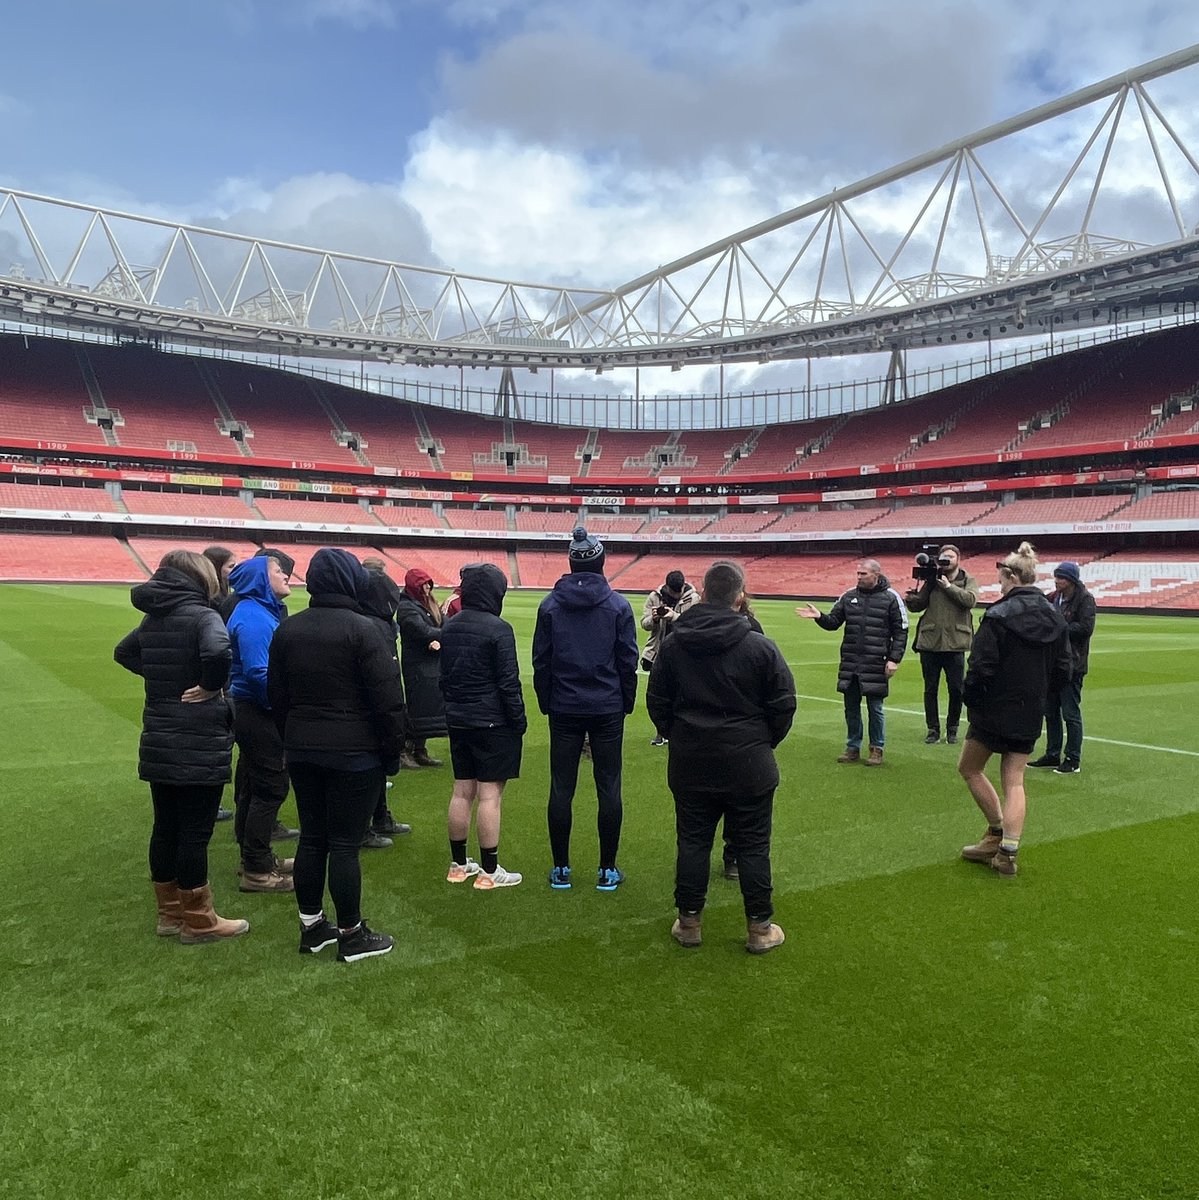 Yesterday an all-female team of 13 grounds staff prepared the Emirates pitch for today's @BarclaysWSL derby with Spurs. We joined @WomeninFootball to watch it happen ... 📹📸💻